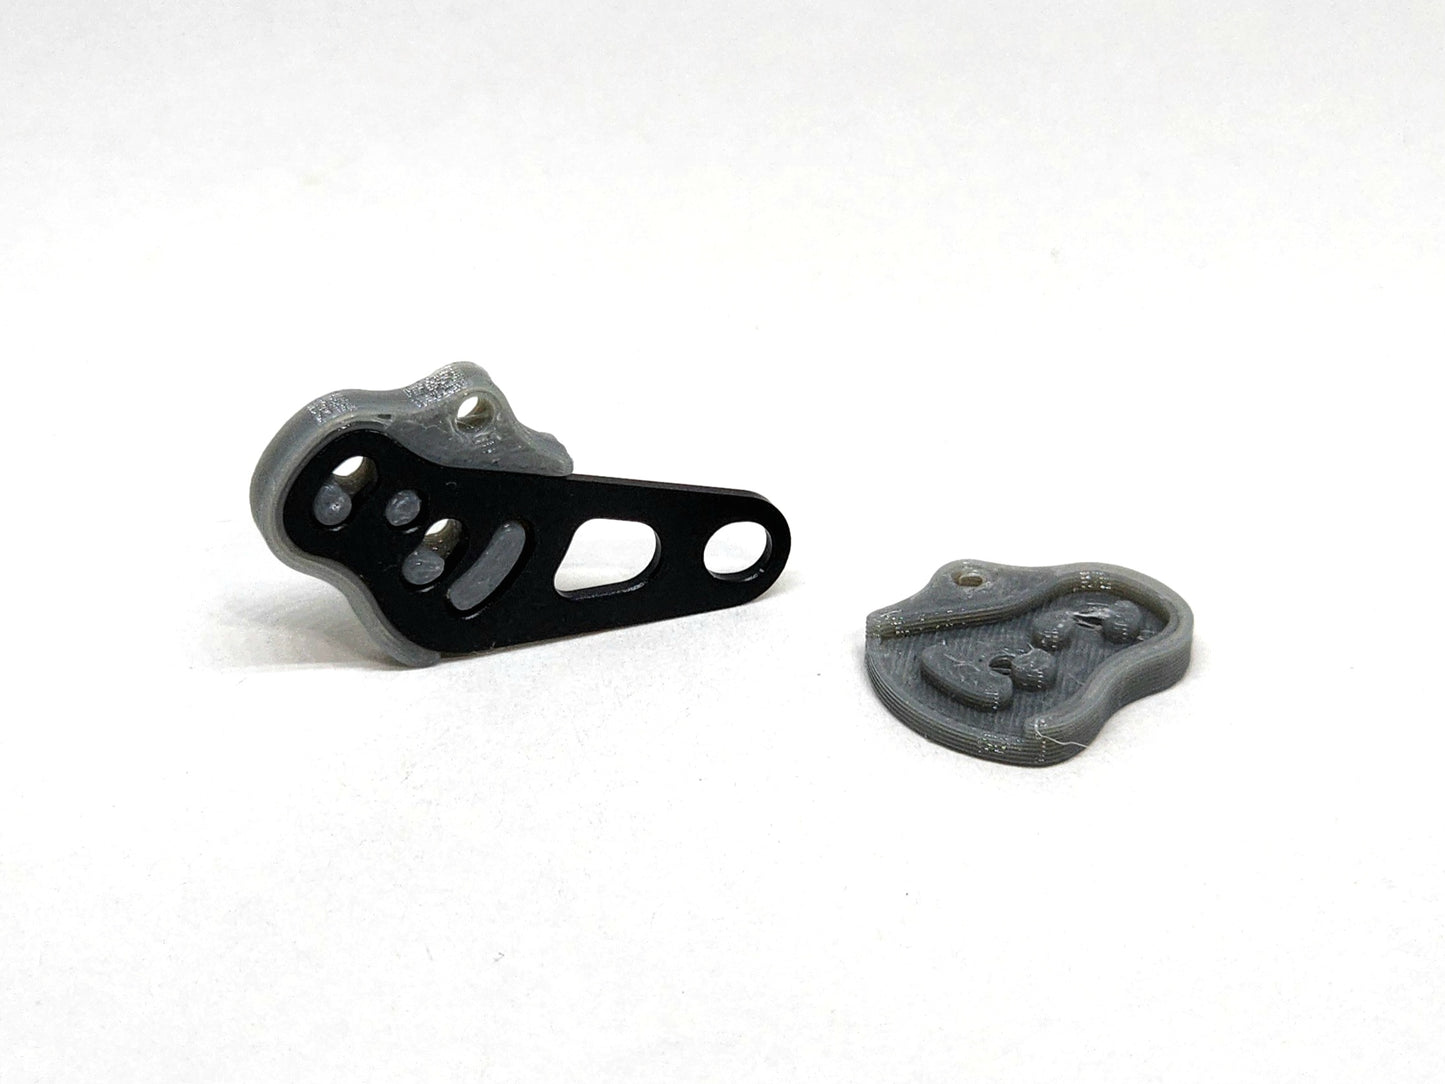 Marmotte or Badger TPU Adapter Mount Spacer Pair for HD DJI O3, Walksnail Avatar Micro, or any Micro 19x19 Camera - Choose Color